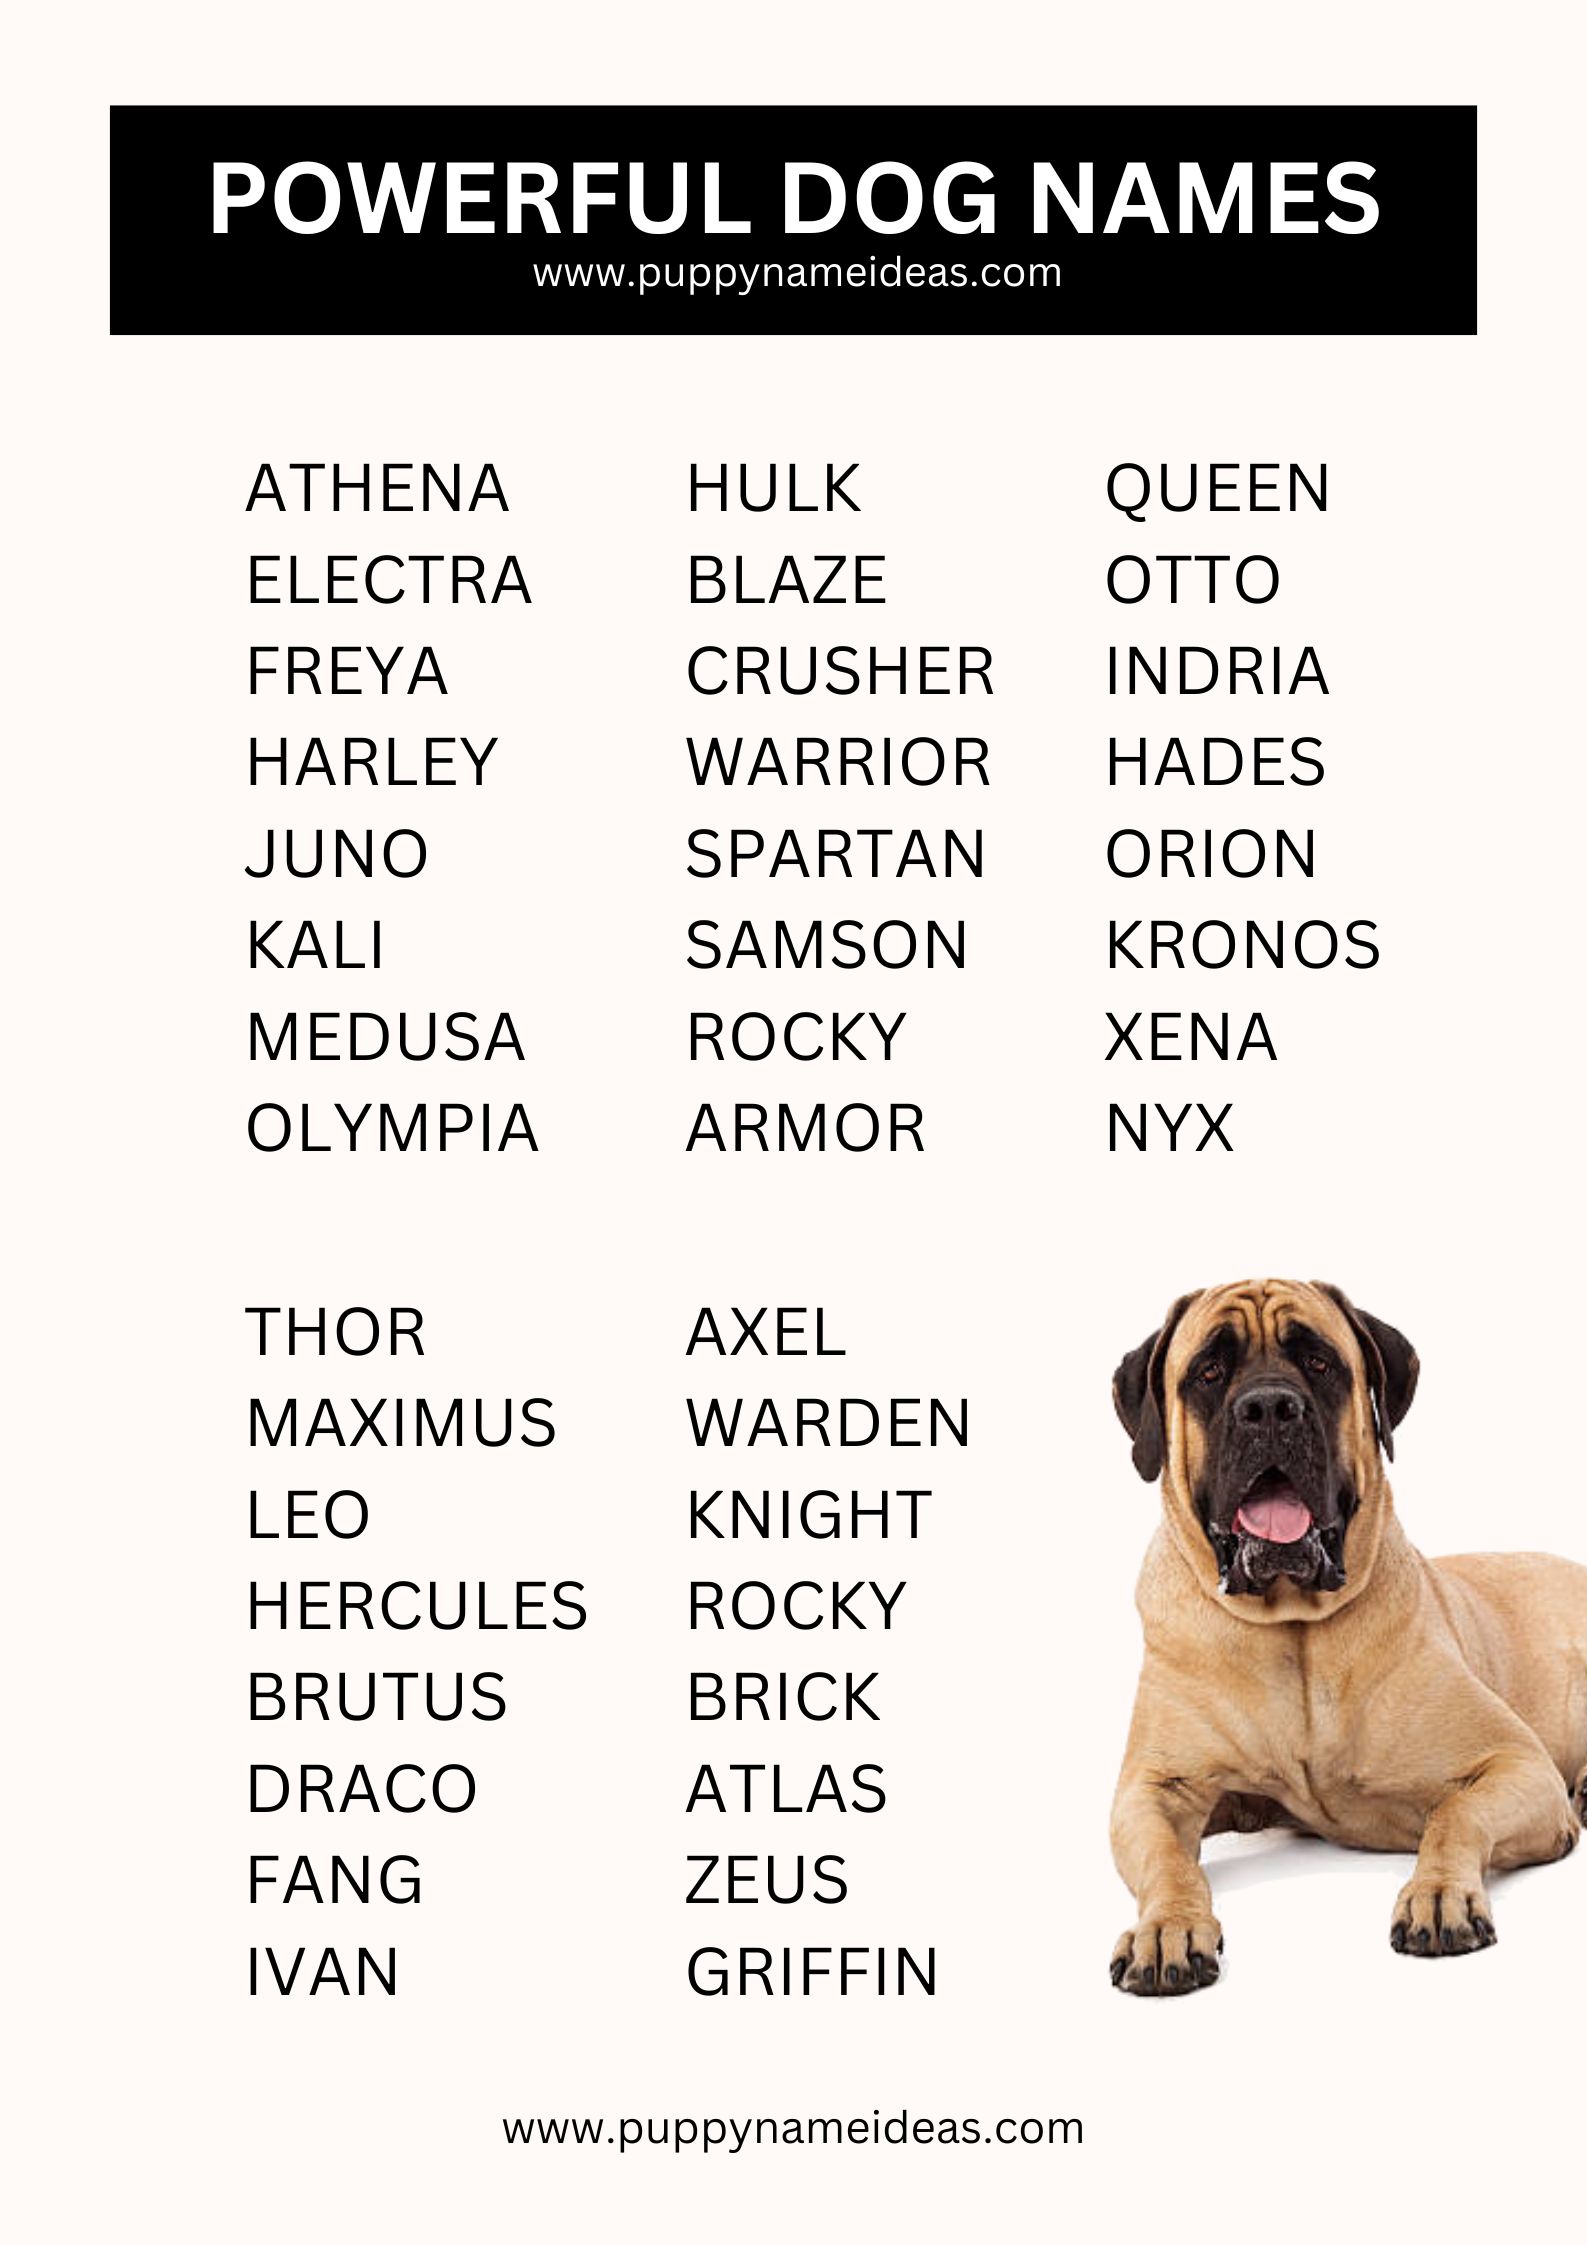 List Of Powerful Dog Names